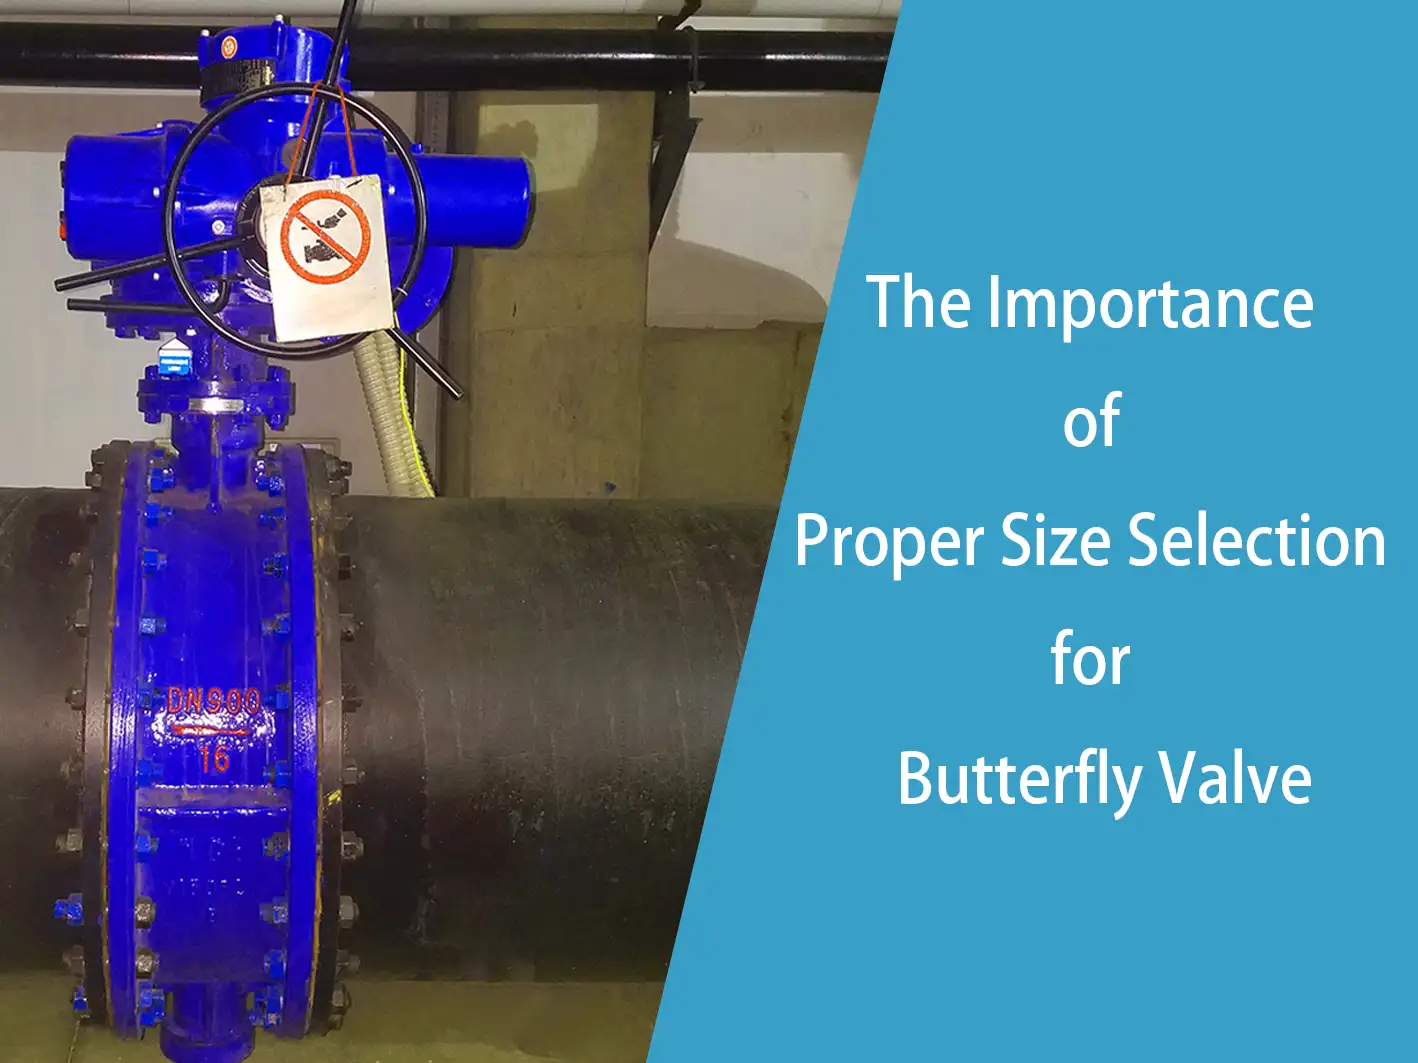 The Importance of Proper Size Selection for Butterfly Valve